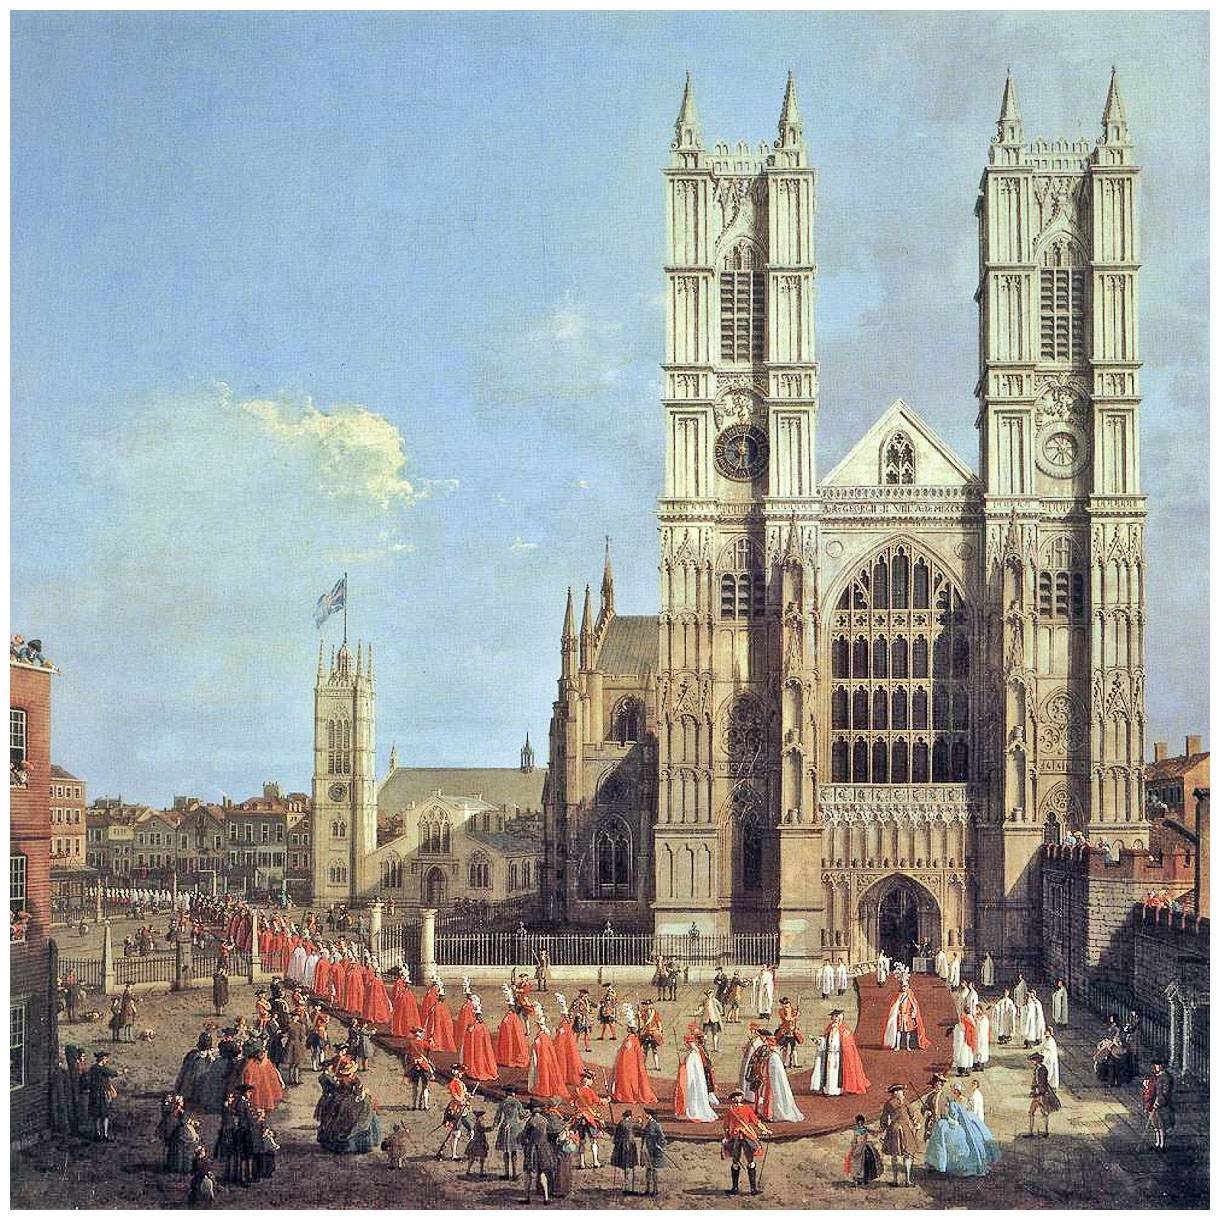 Canaletto. Westminster Abbey. 1749. Westminster Abbey London